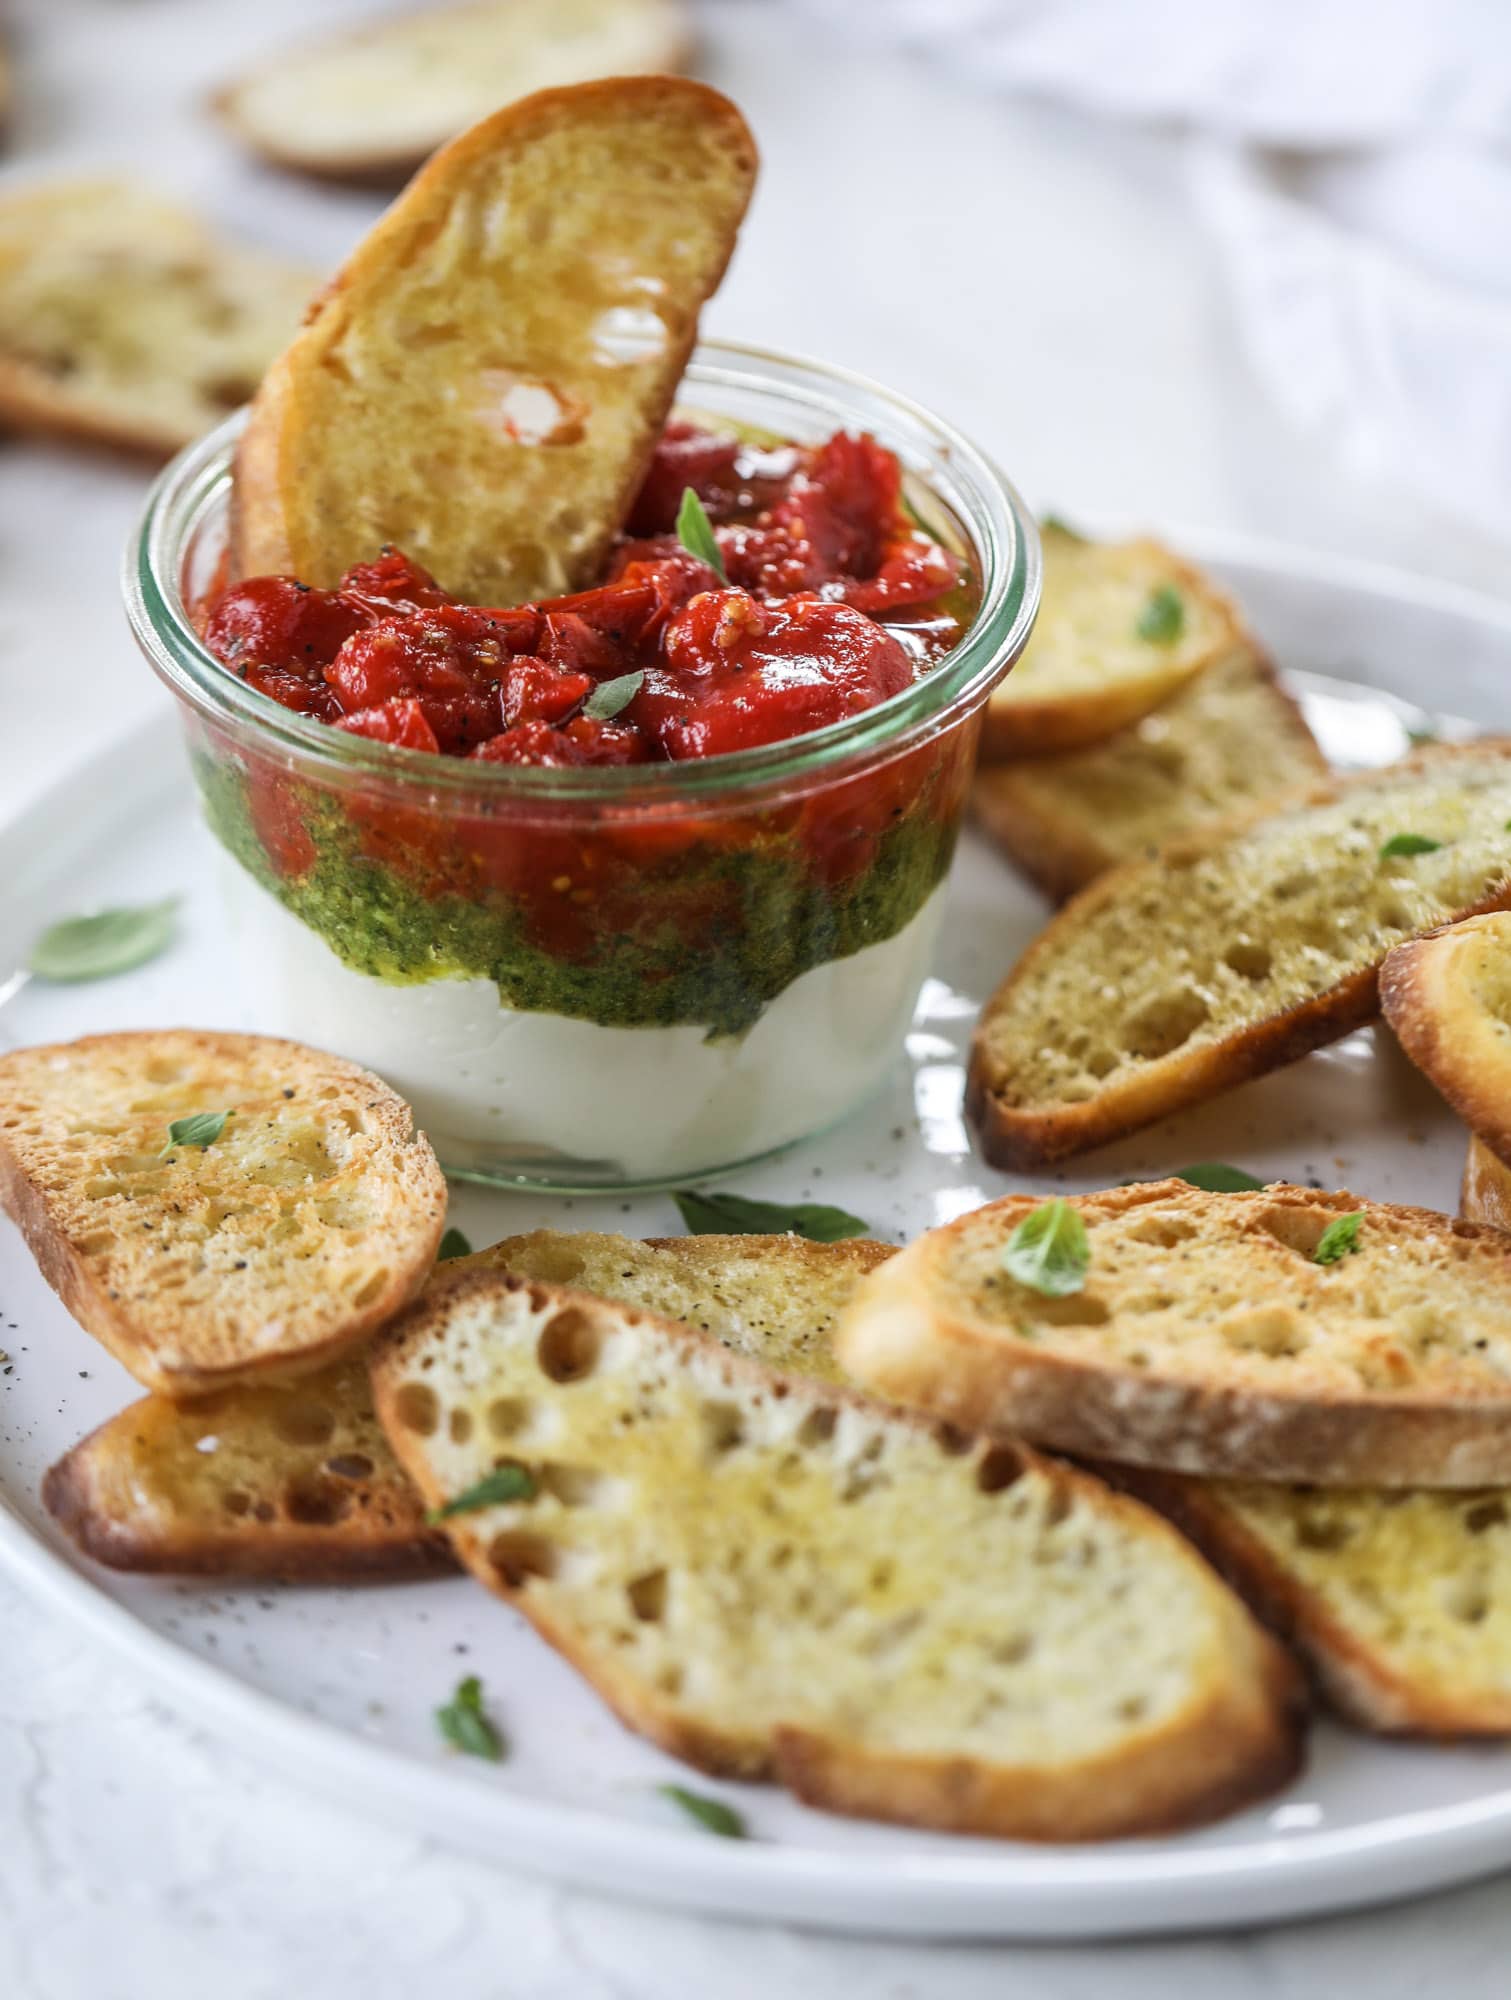 This ricotta jam jar is the perfect appetizer and snack to serve at a party! Based on the ricotta jam jar served at Nordstrom Cafe, it starts with creamy ricotta, is topped with flavorful basil pesto and a quick tomato jam. Serve with crunchy bread and dip dip dip! I howsweeteats.com #ricotta #jam #jar #nordstrom #tomato #pesto #appetizer #dip